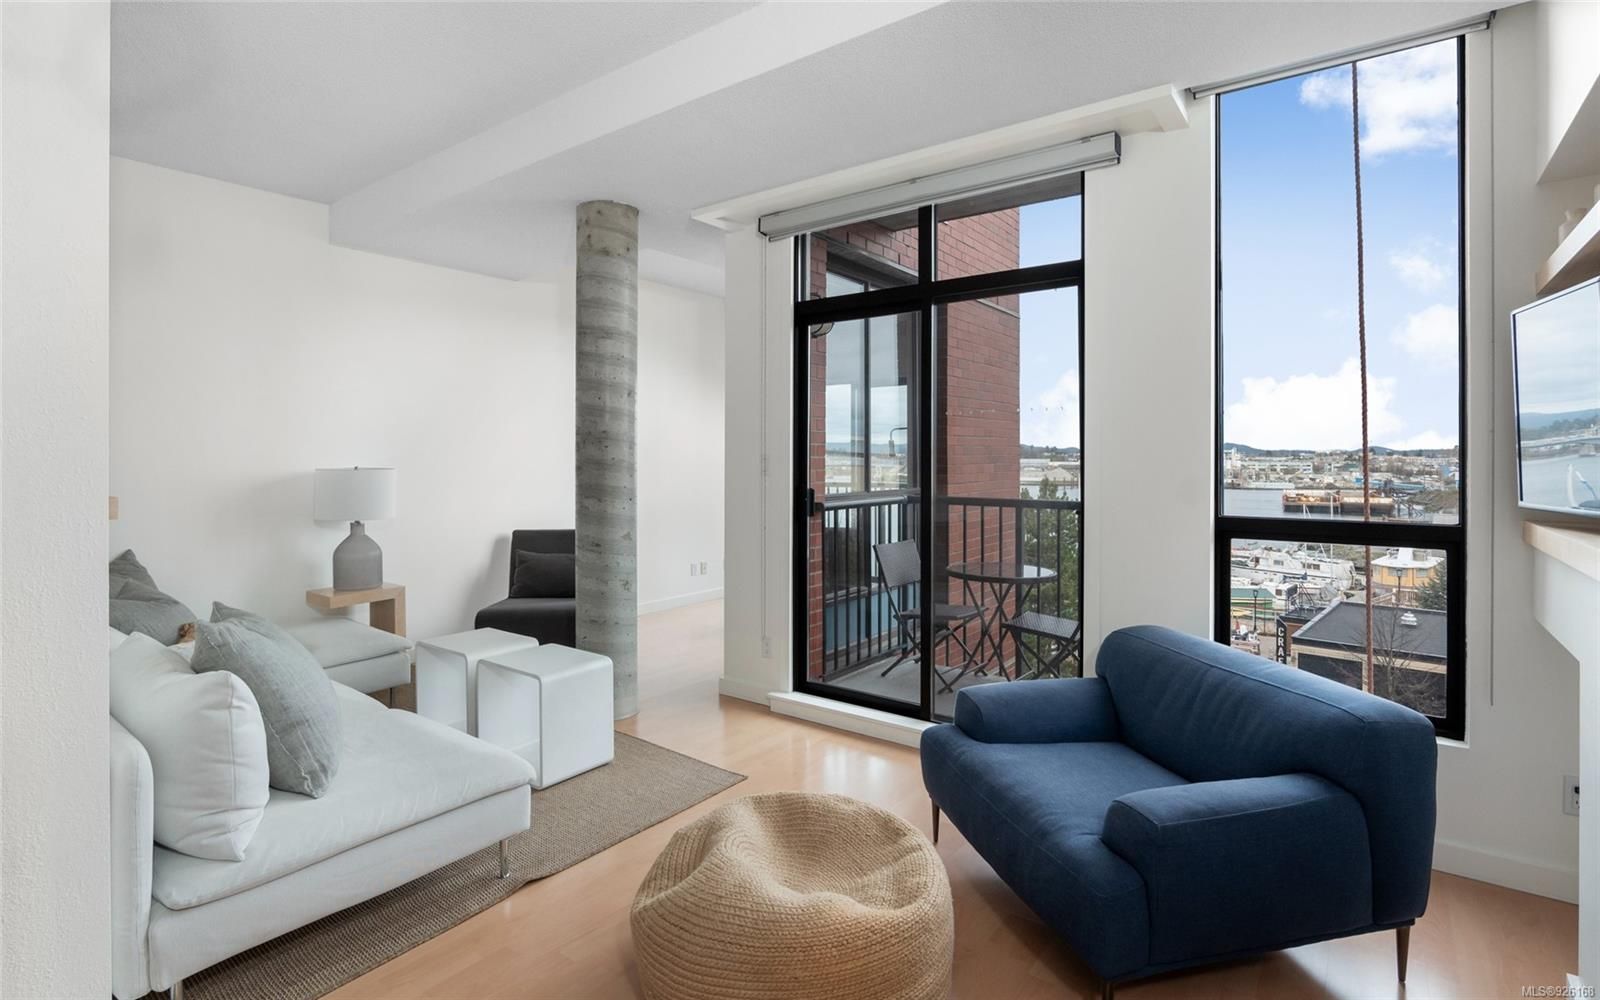 Welcome To This Stylish Waterfront Condo